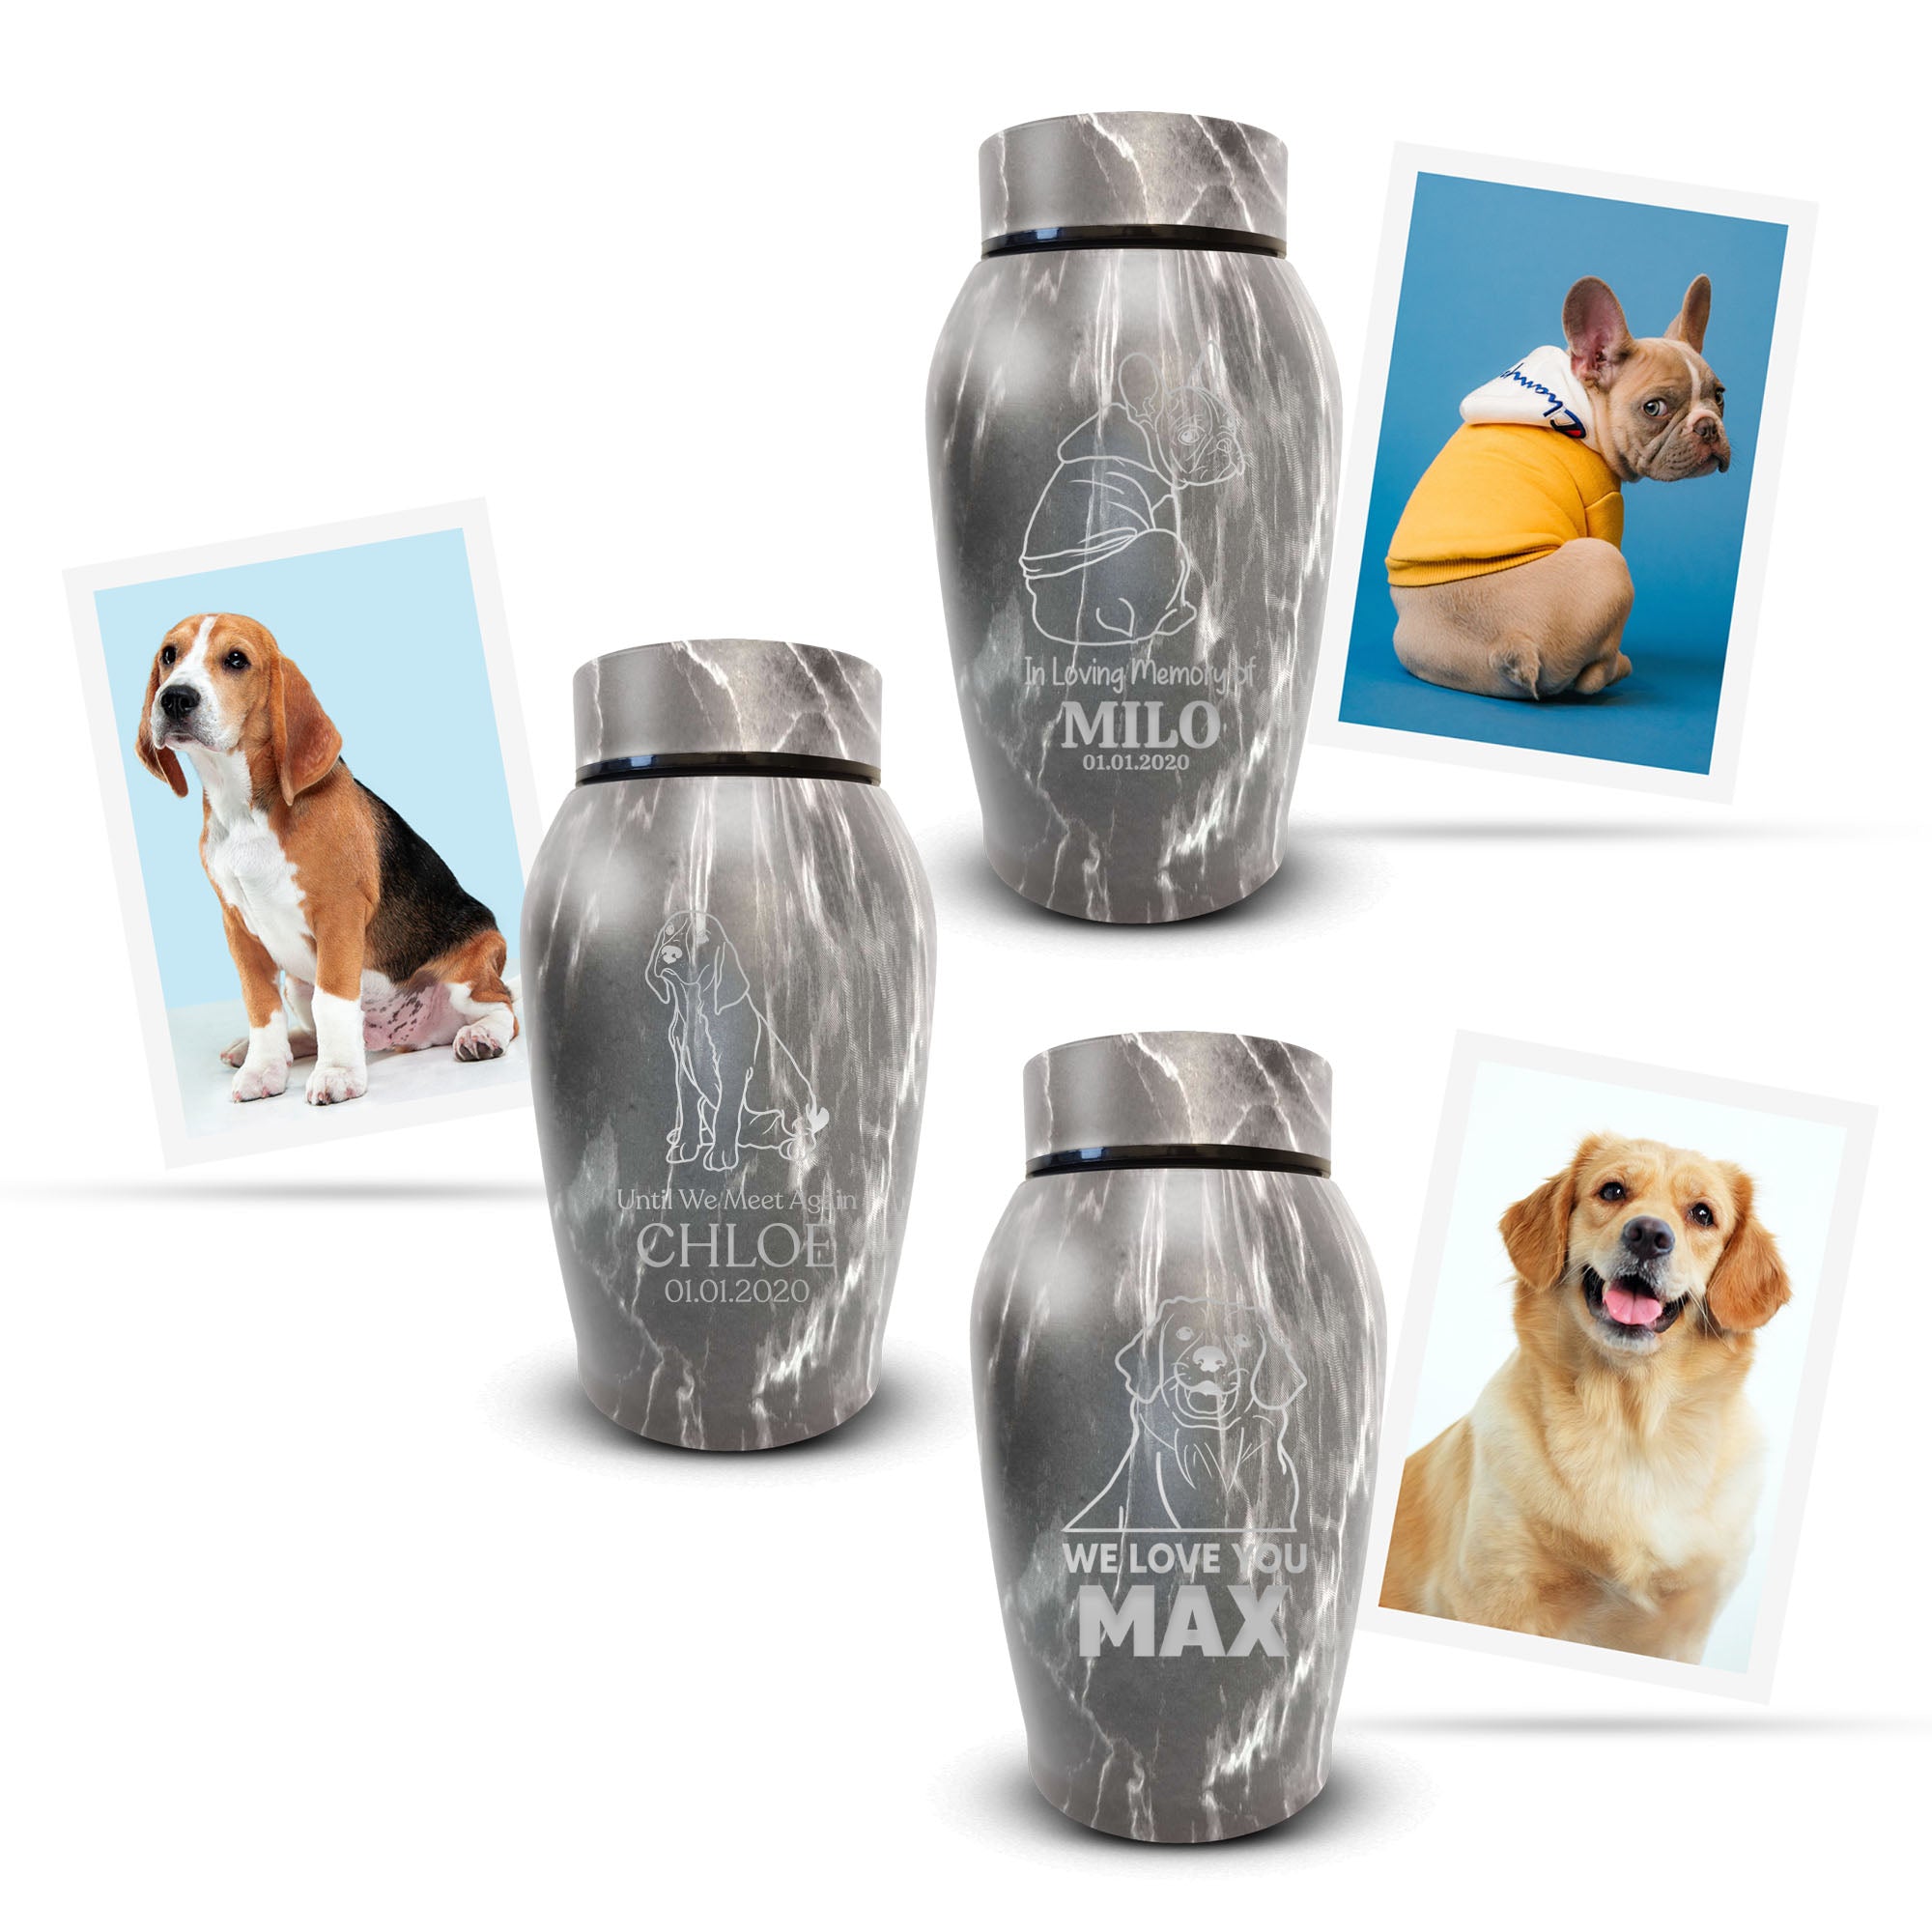 Custom Engraved Pet Photo/Image Stone Gray Urn - Personalized Textured Cremation Urn - Stainless Steel Urn for Dog Memorial Ashes | Gray